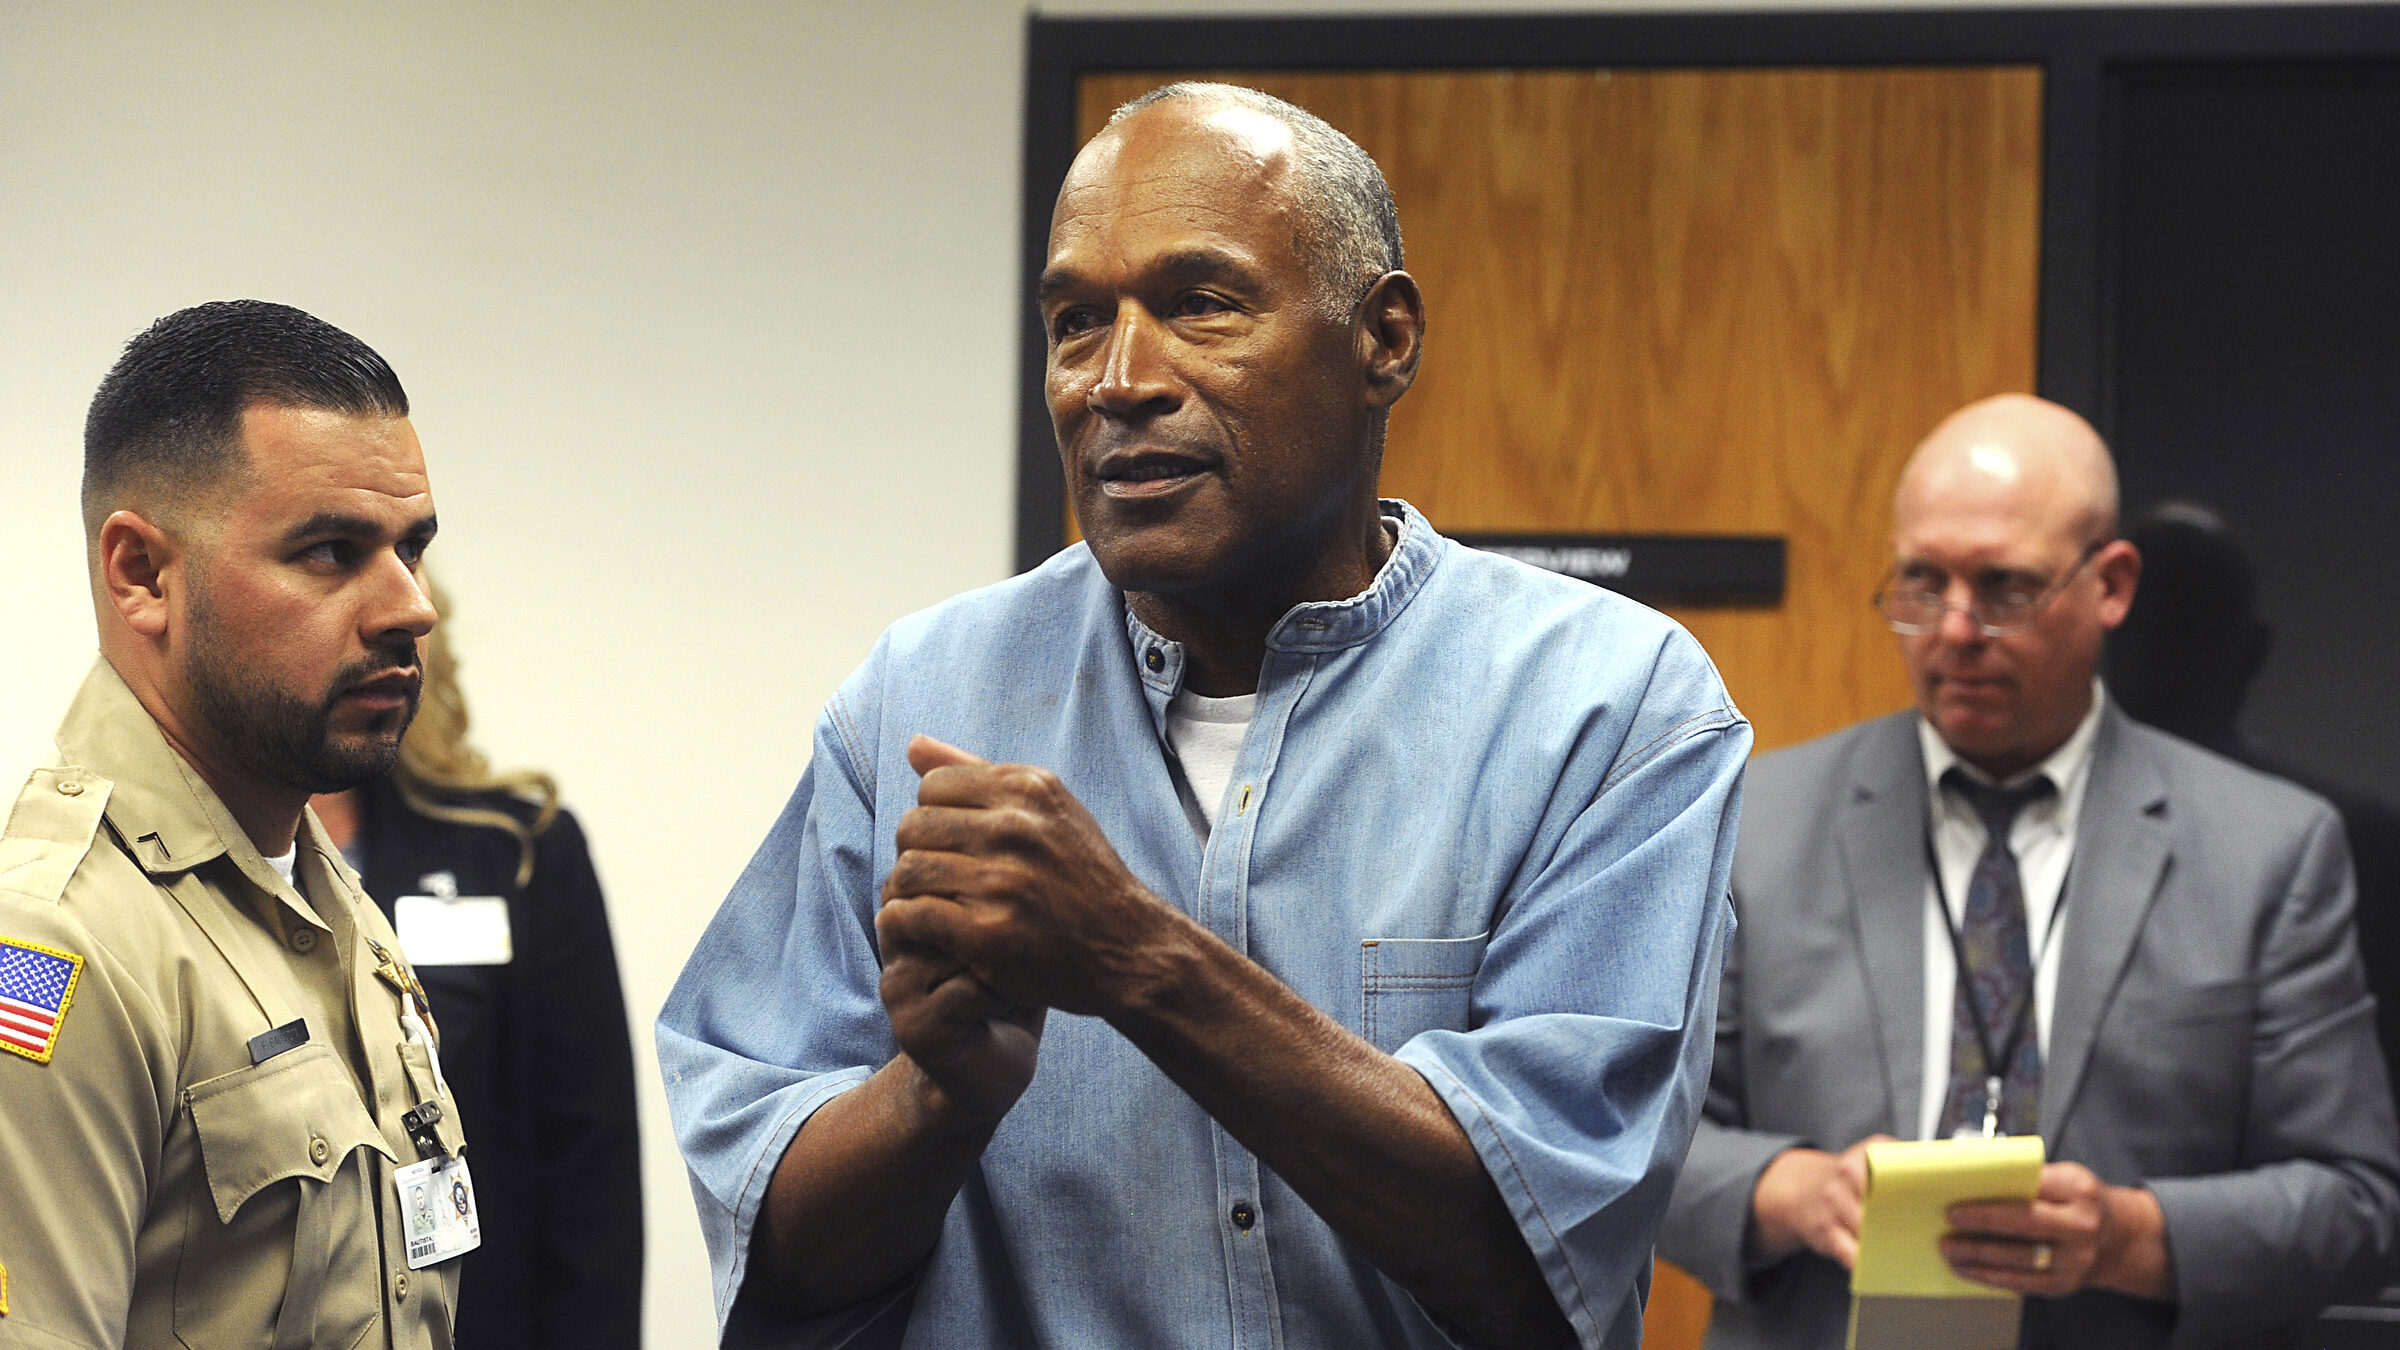 FILE - In this July 20, 2017 file photo, former NFL football star O.J. Simpson reacts after learnin...